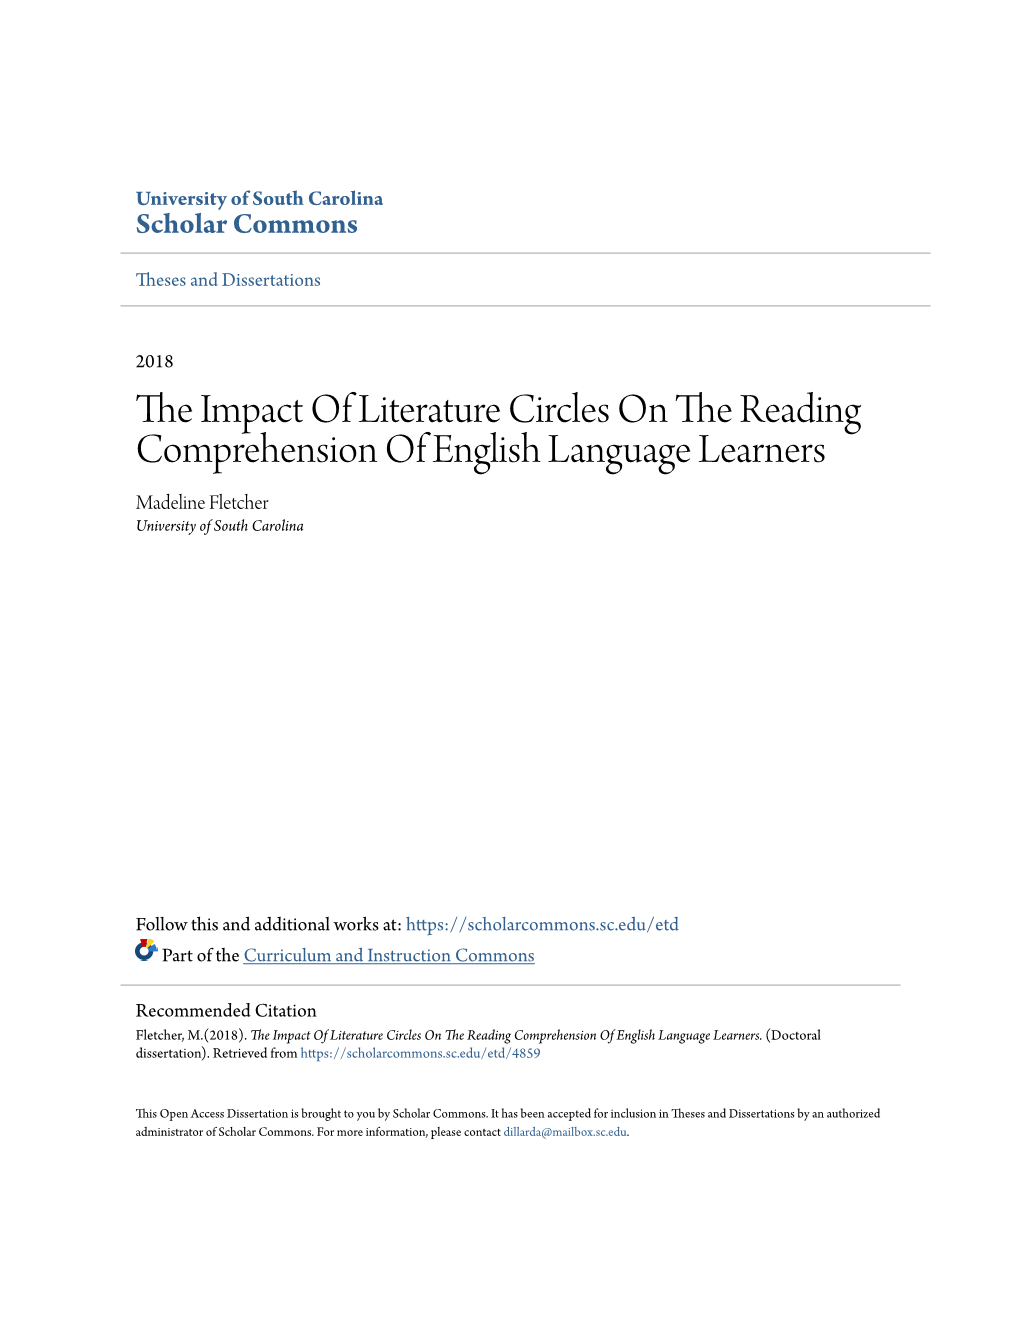 The Impact of Literature Circles on the Reading Comprehension of English Language Learners